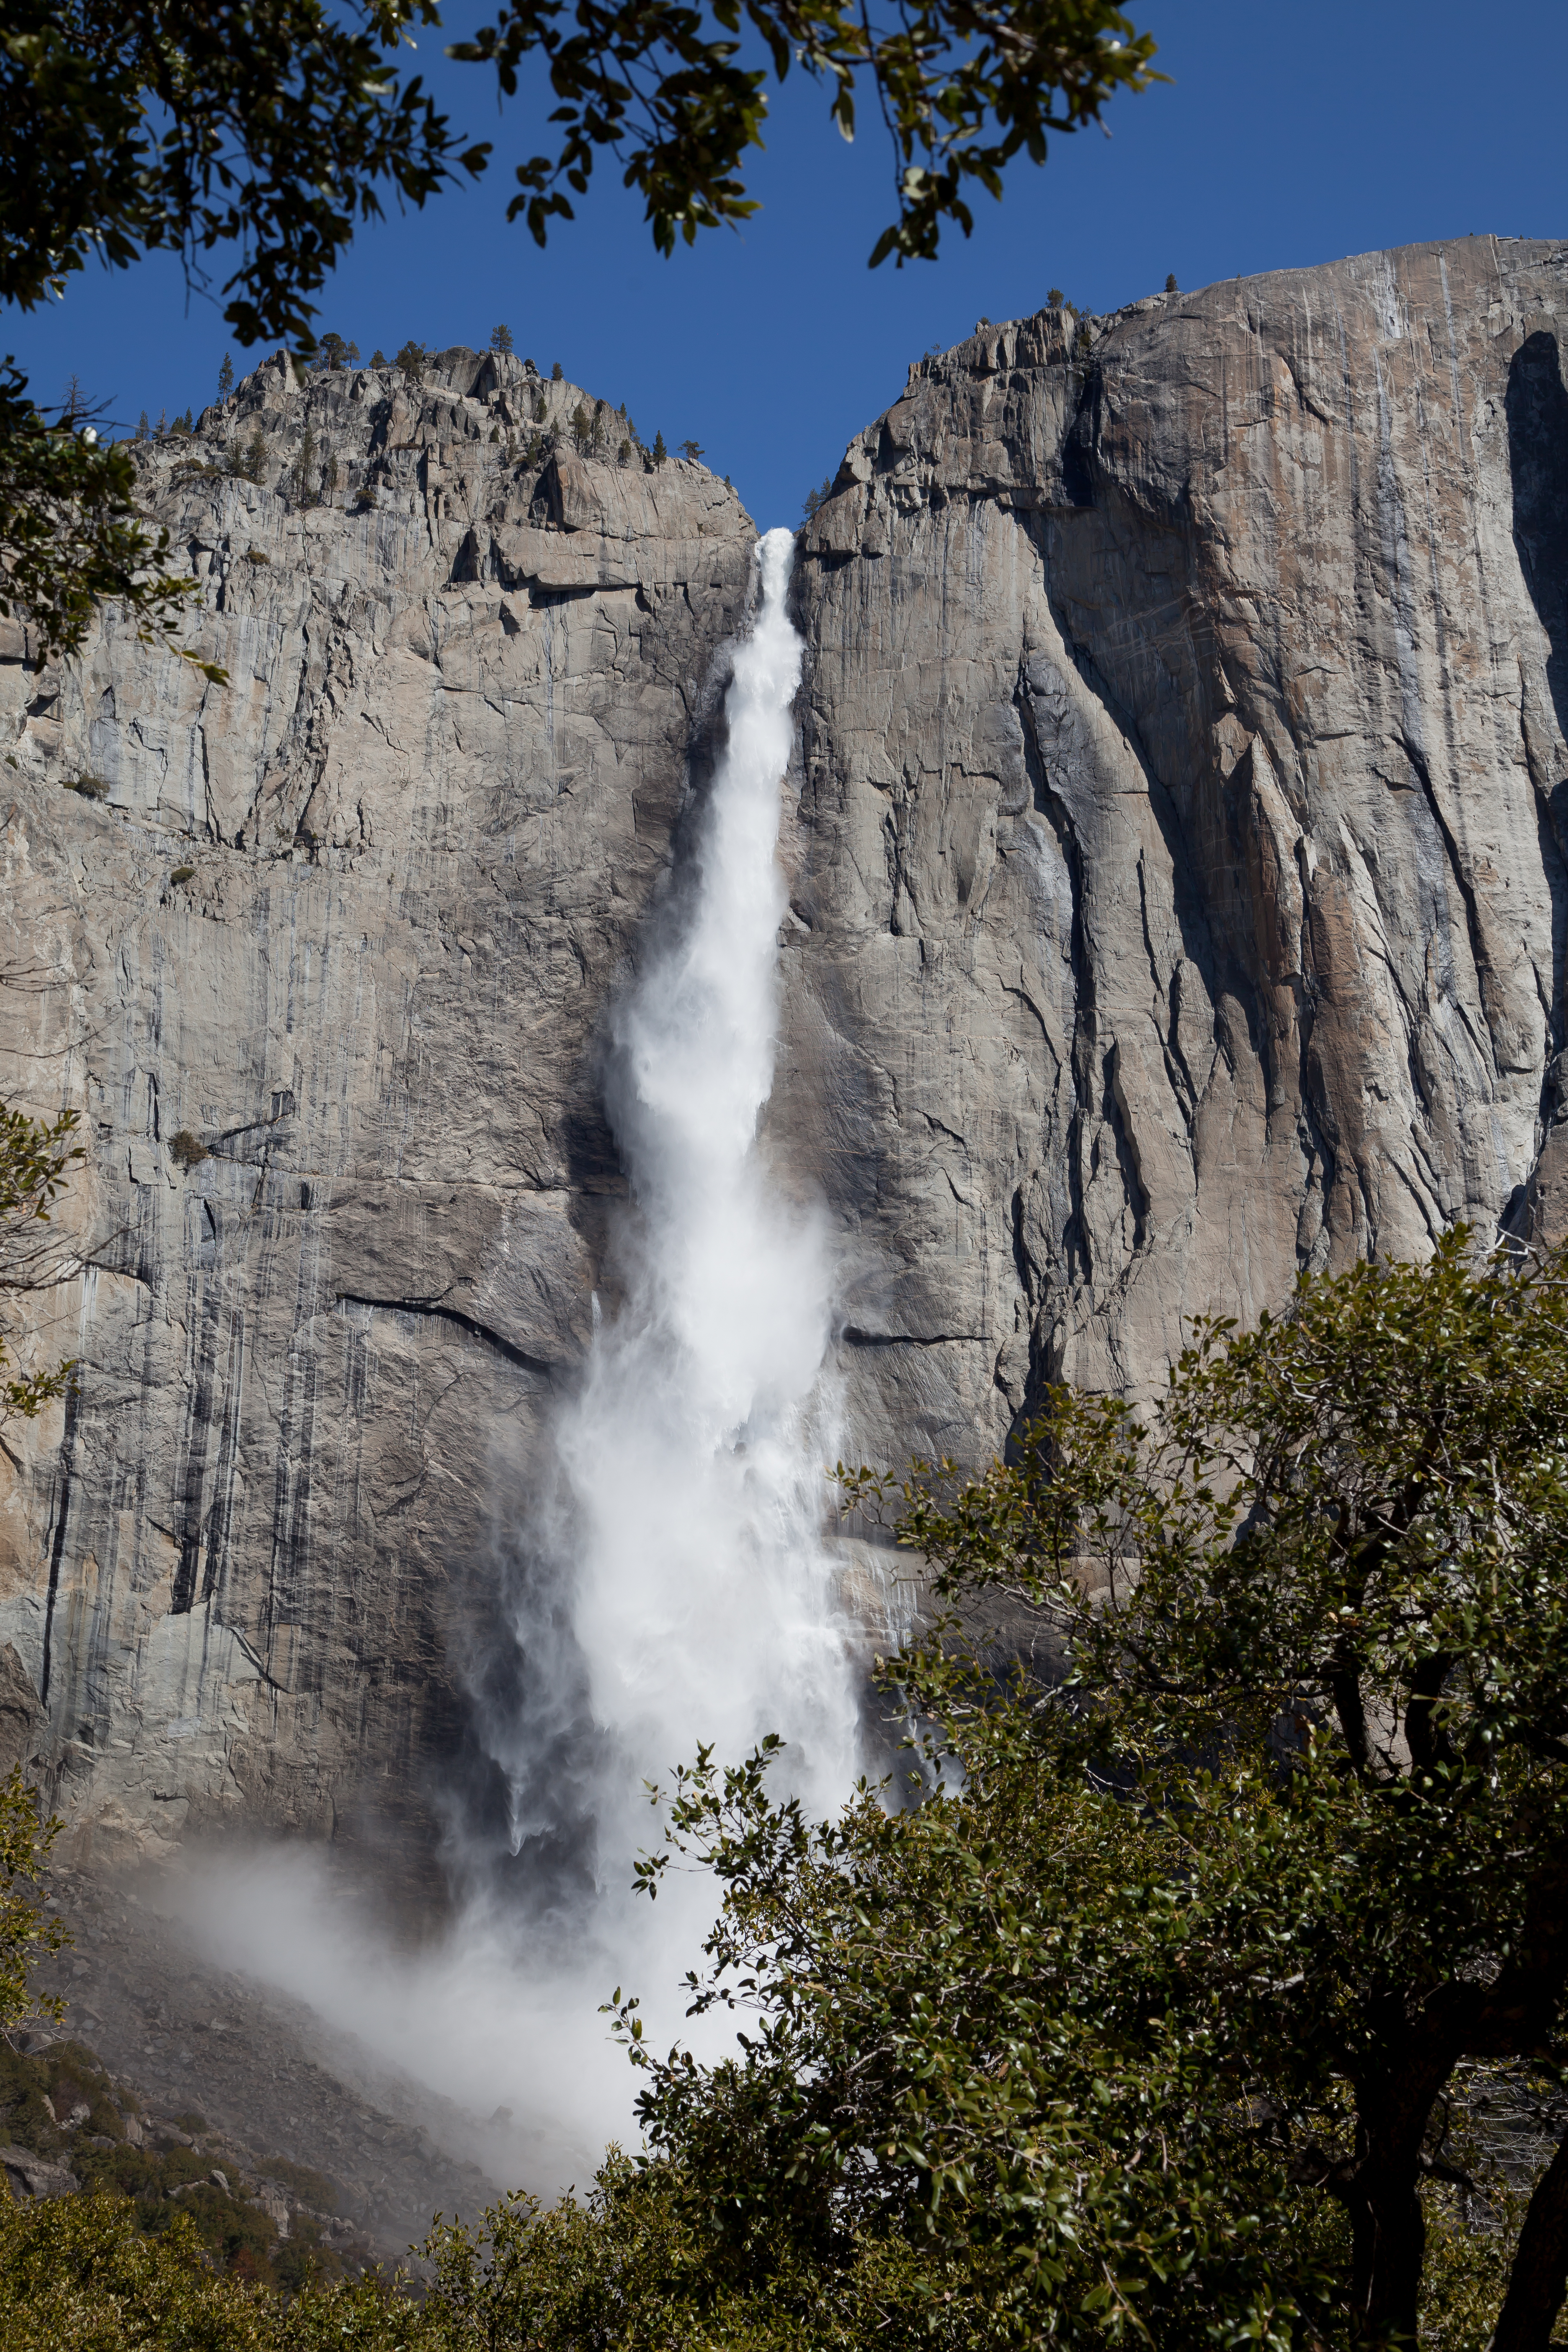 a view of Upper Yosemite Fall from below